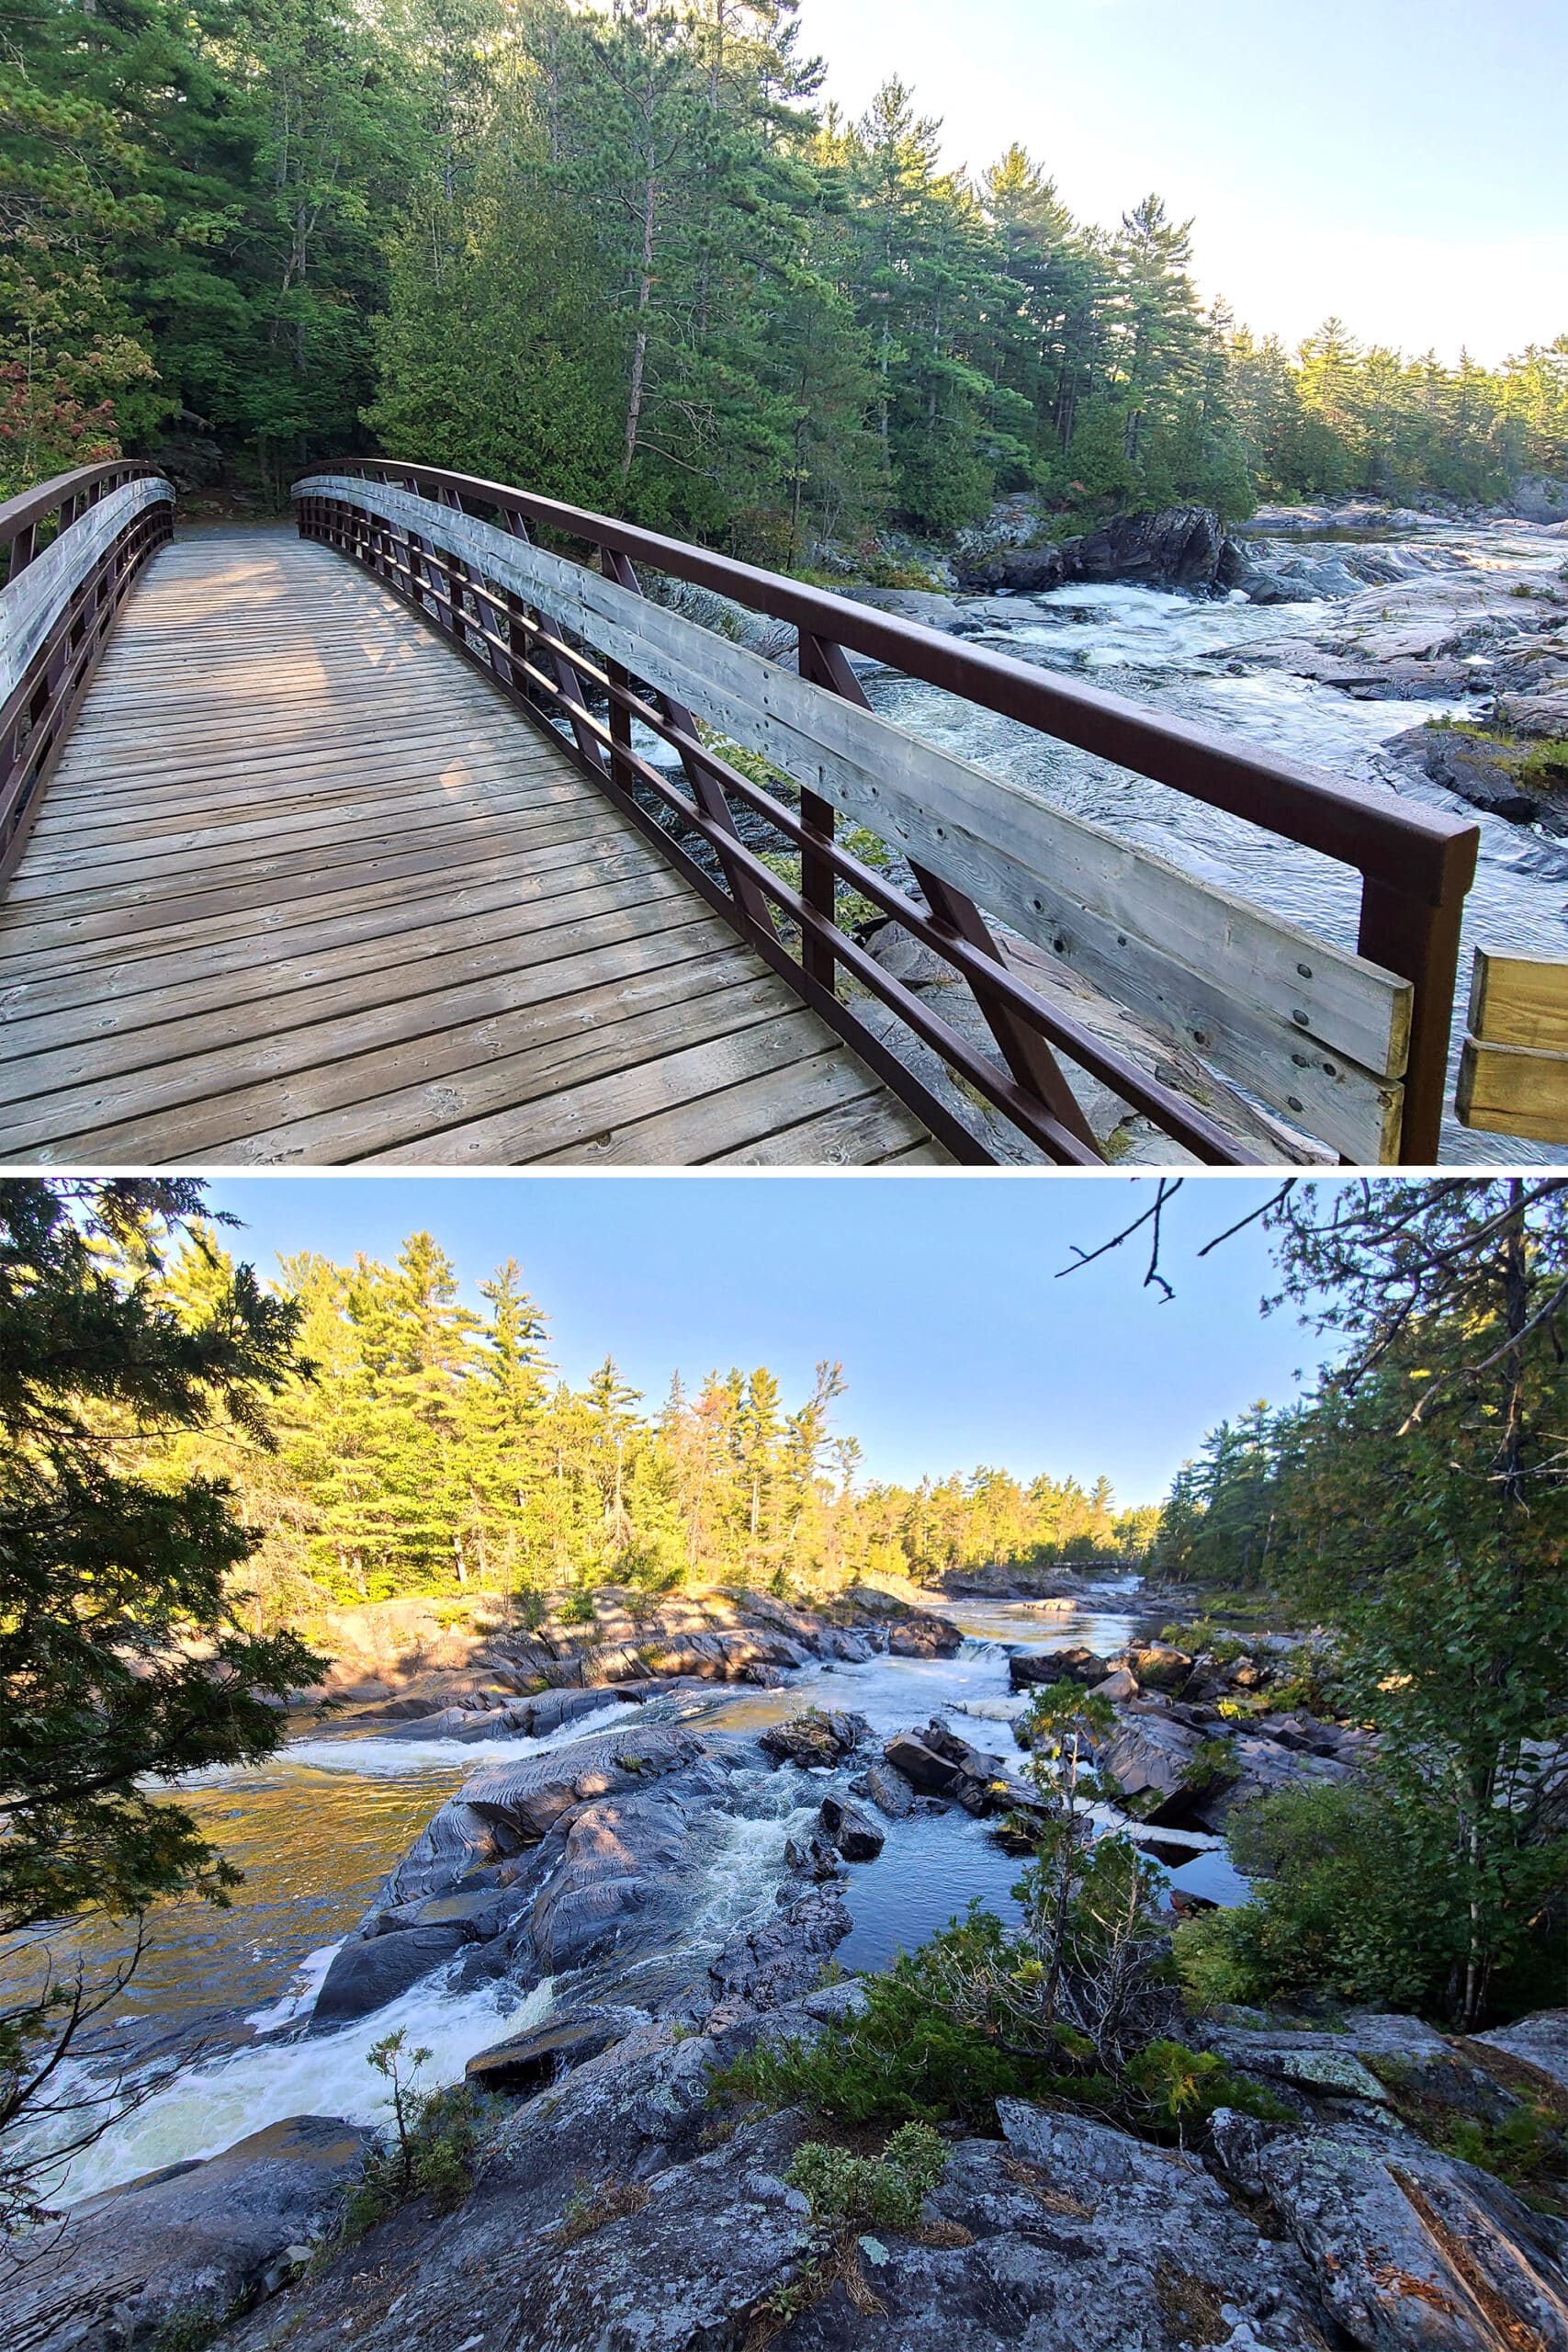 2 part image showing a bridge over the rapids, and the rapids themselves.